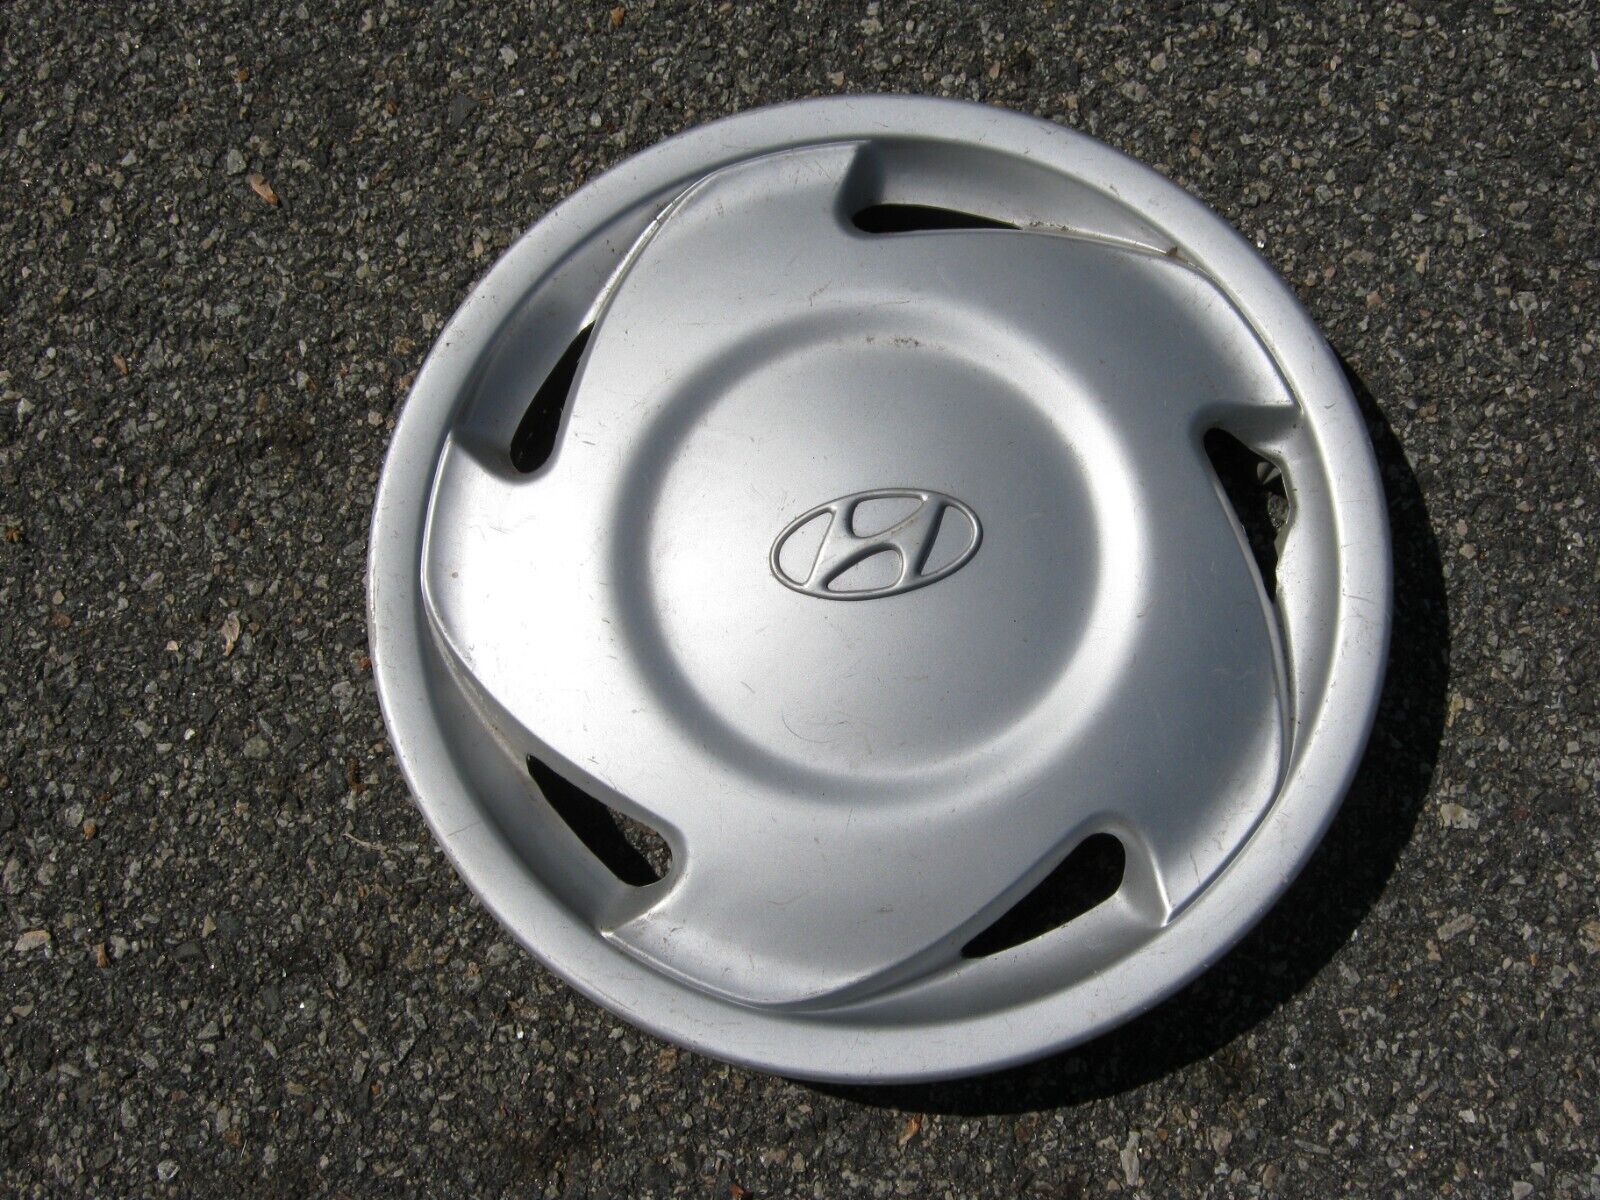 One factory 1992 Hyundai Scoupe 14 inch hubcap wheel cover